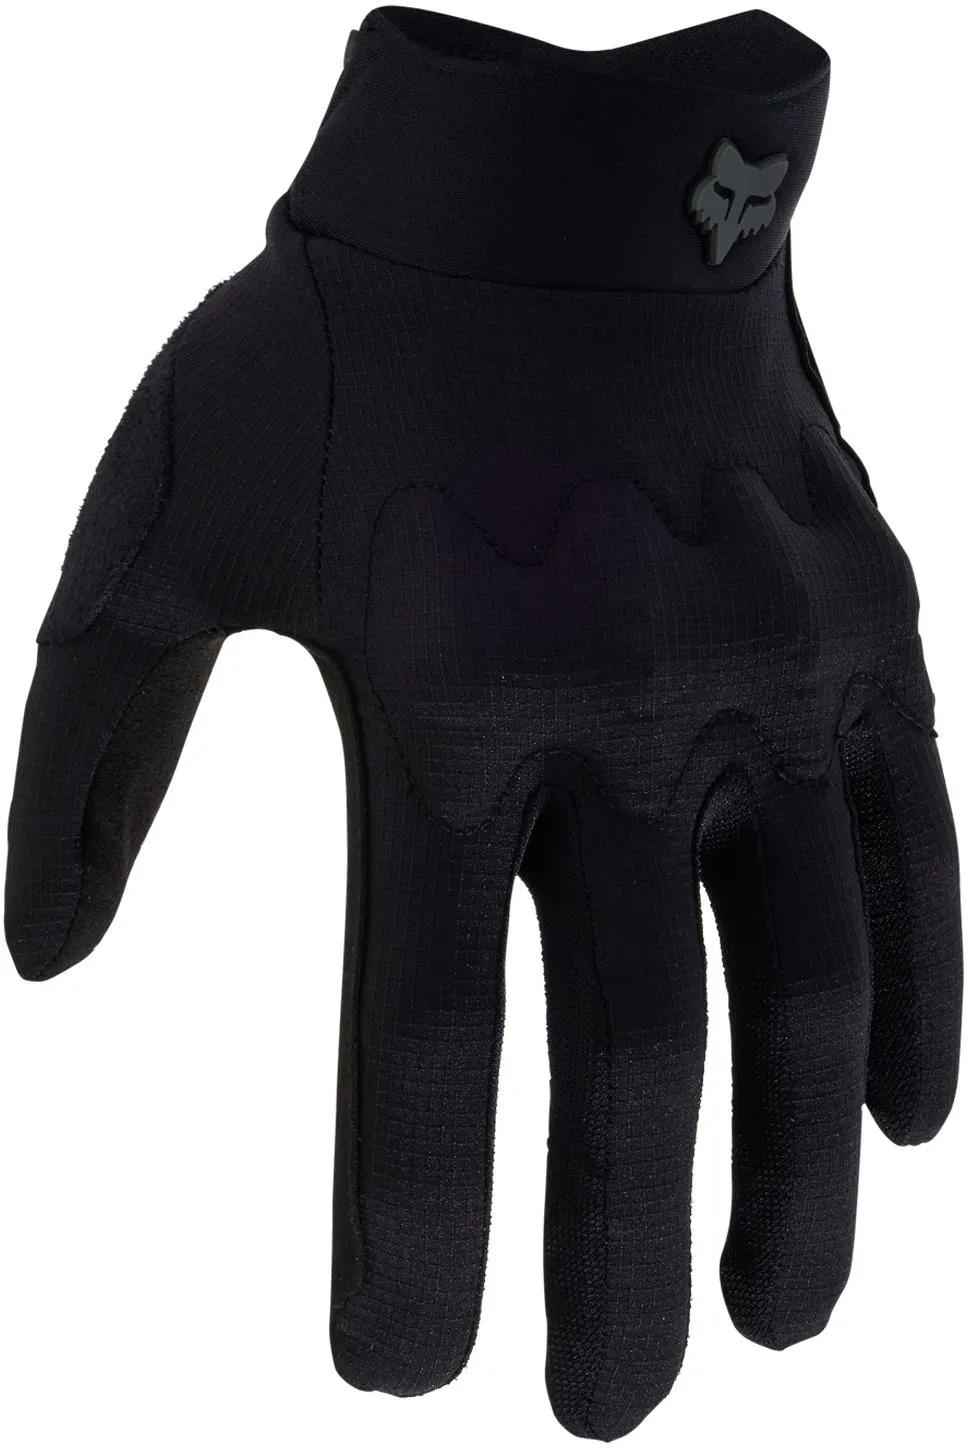  Defend D3O Cycling Gloves, Black